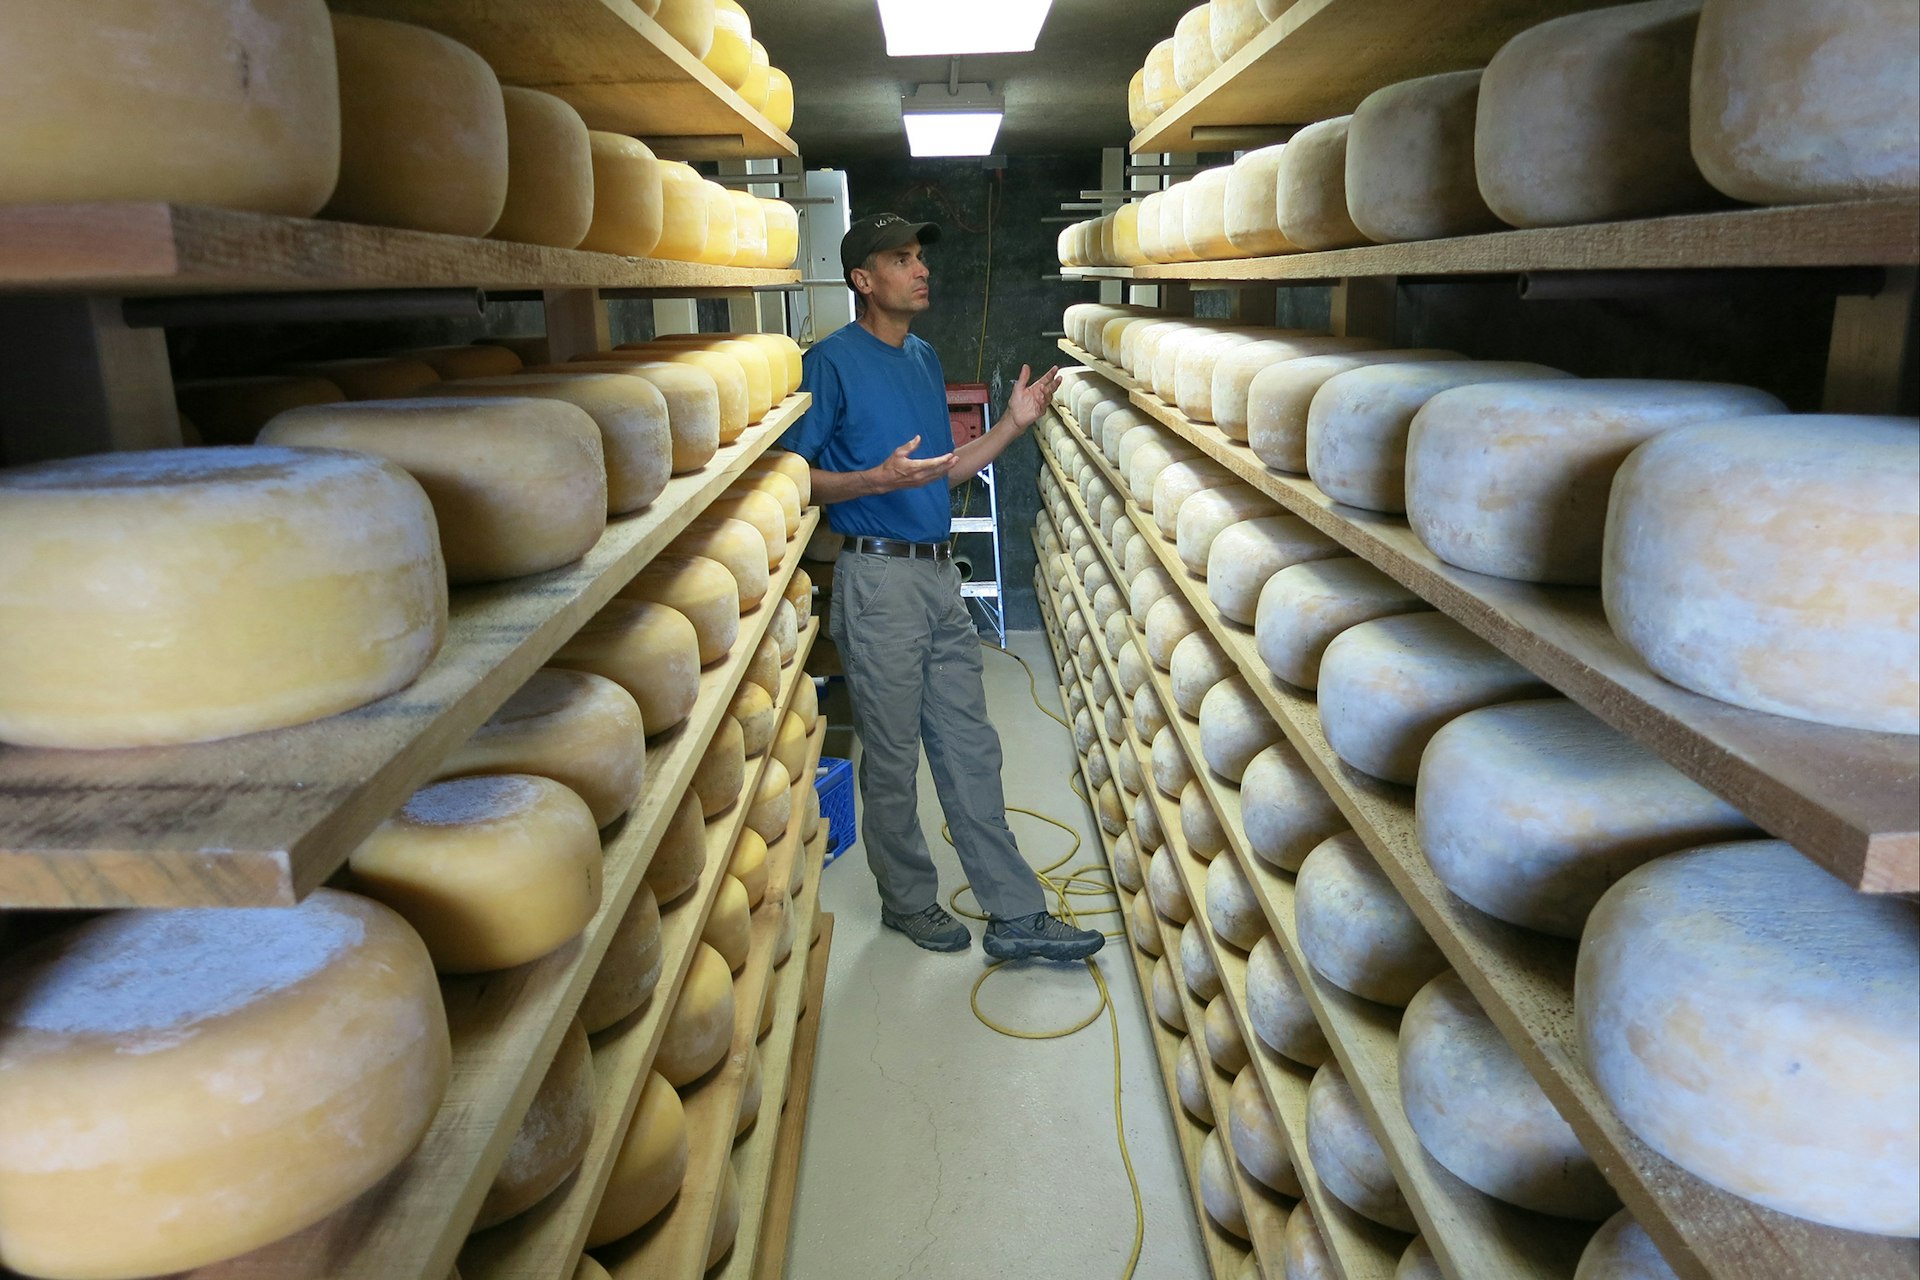 Cheese drying at James Ranch. Image by Leif Pettersen / Lonely Planet